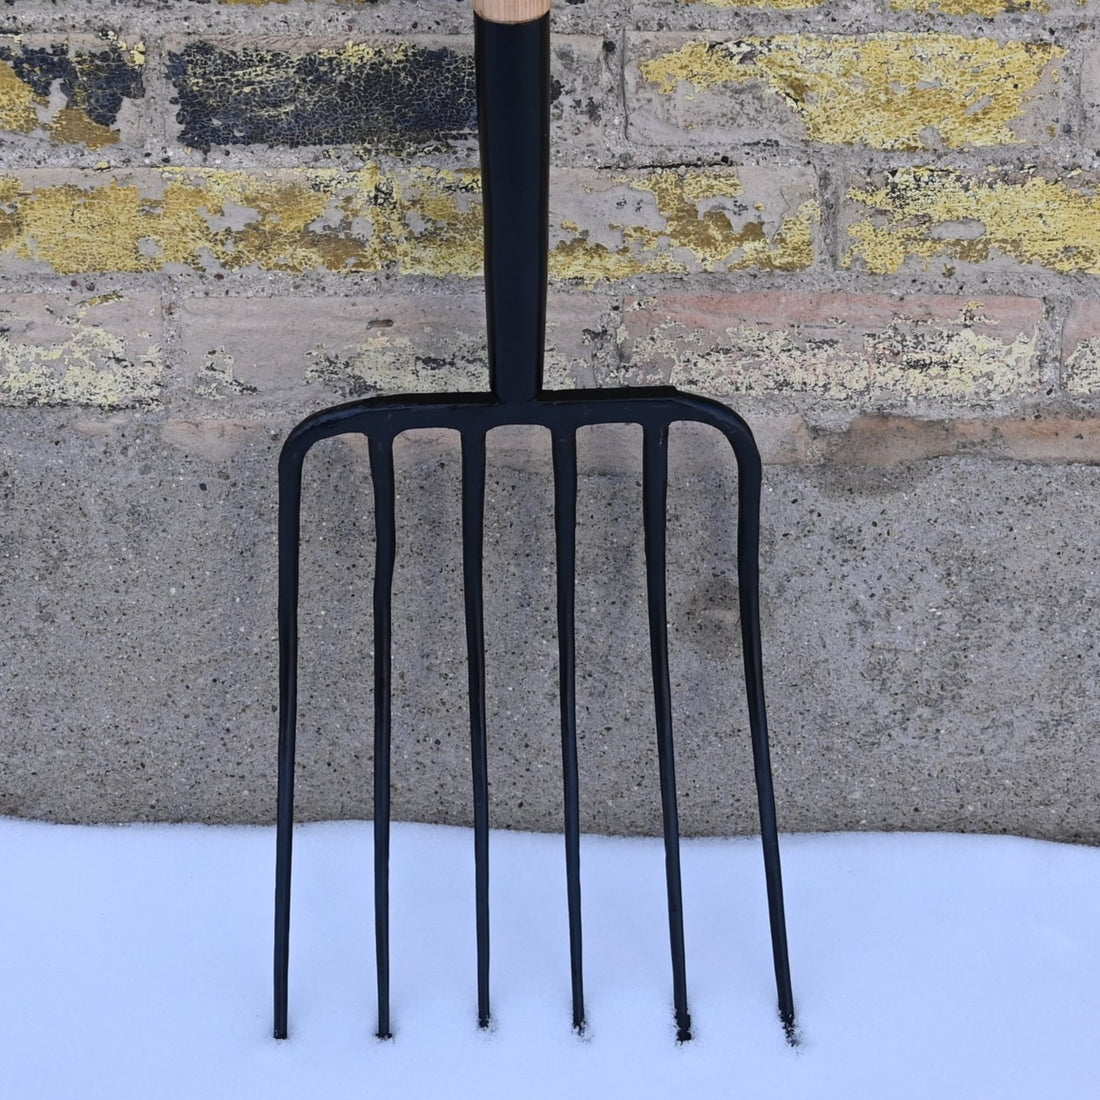 Seymour® 6 Tine Forged Manure Fork W/Hardwood Handle view of tines